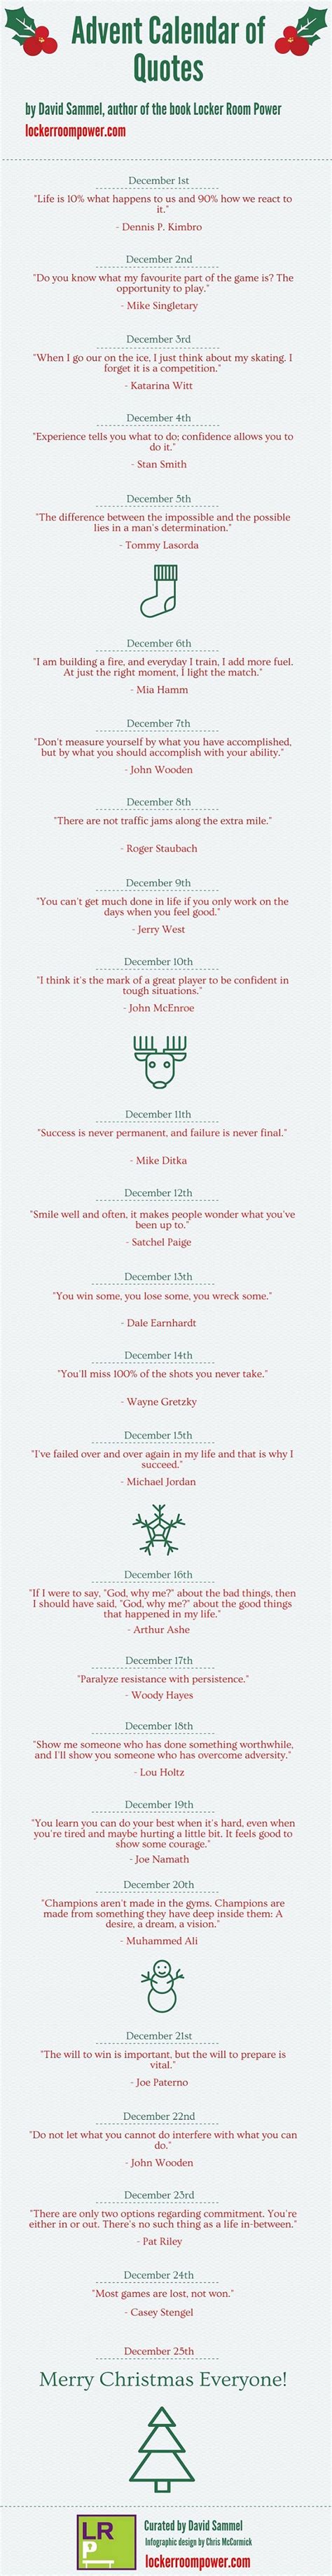 advent calendar of quotes mighty infographics